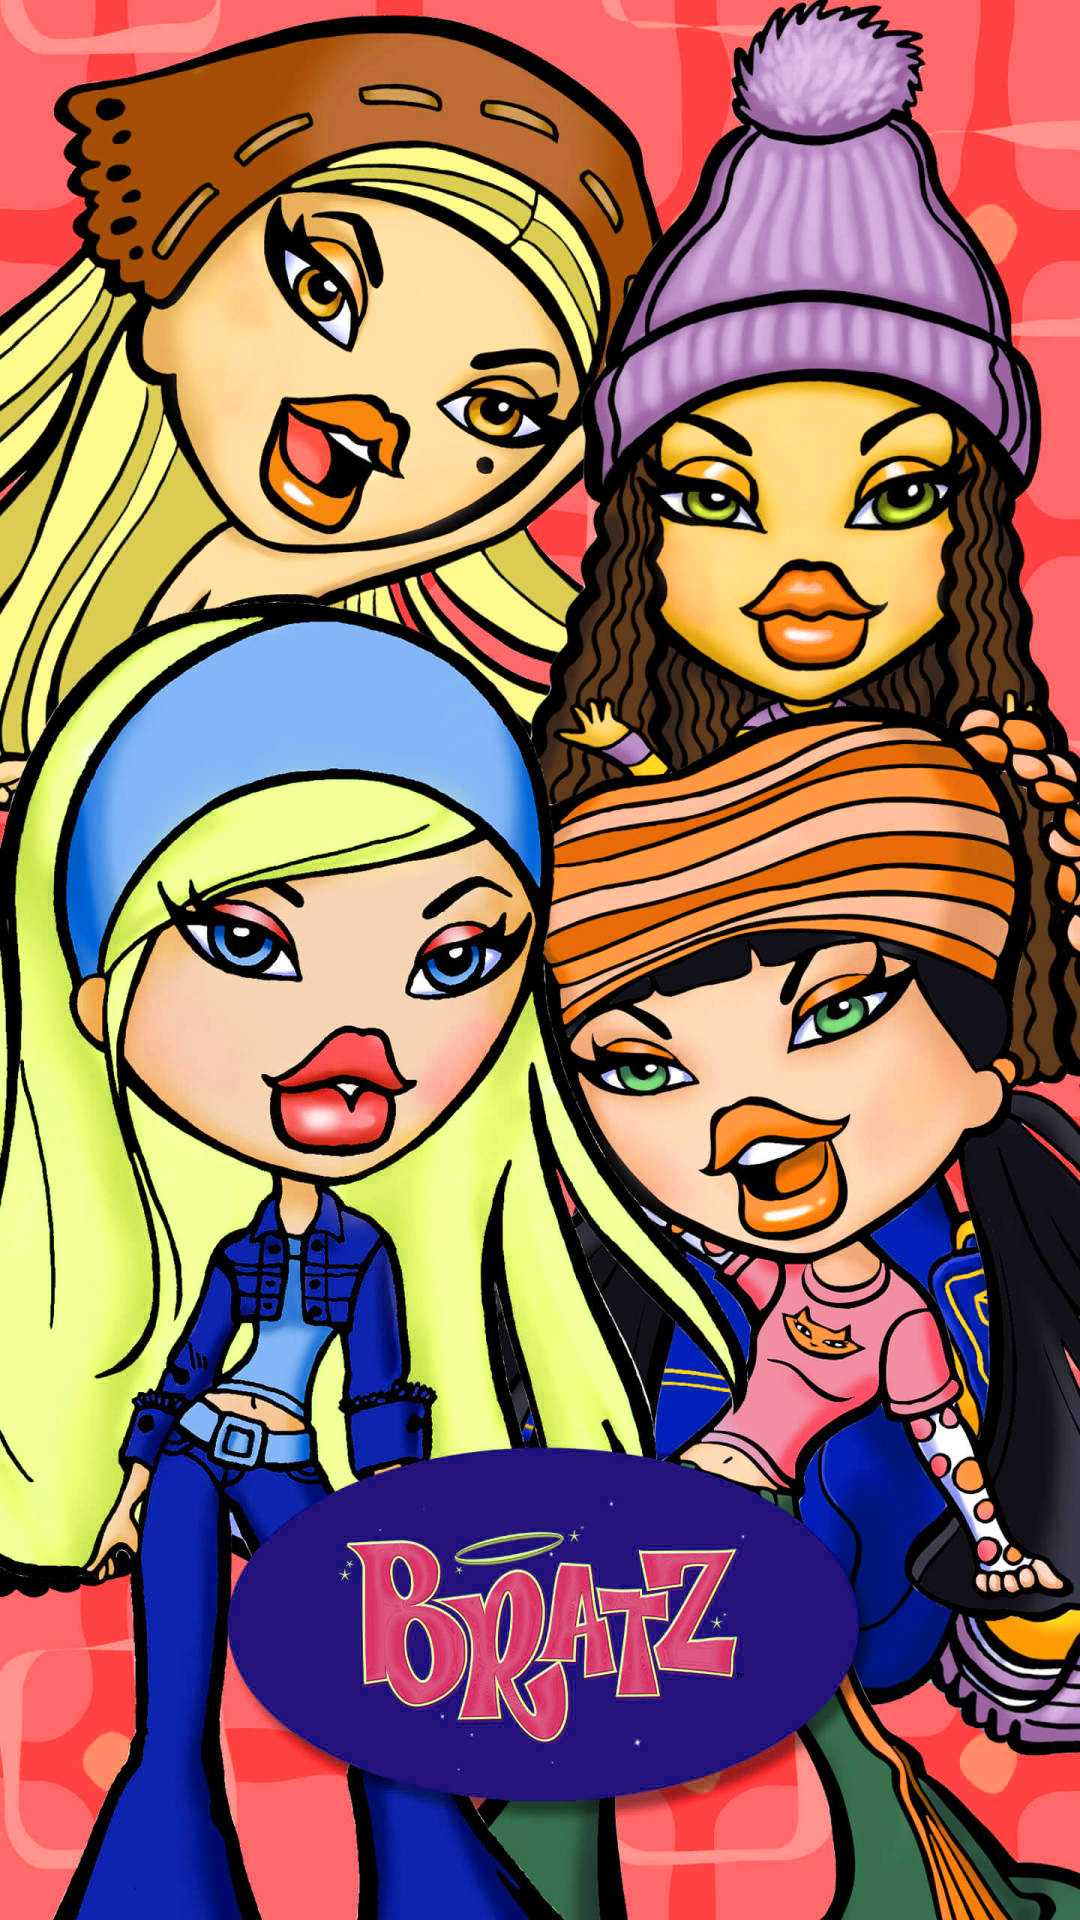 A cartoon of four girls with hats and scarves - Bratz